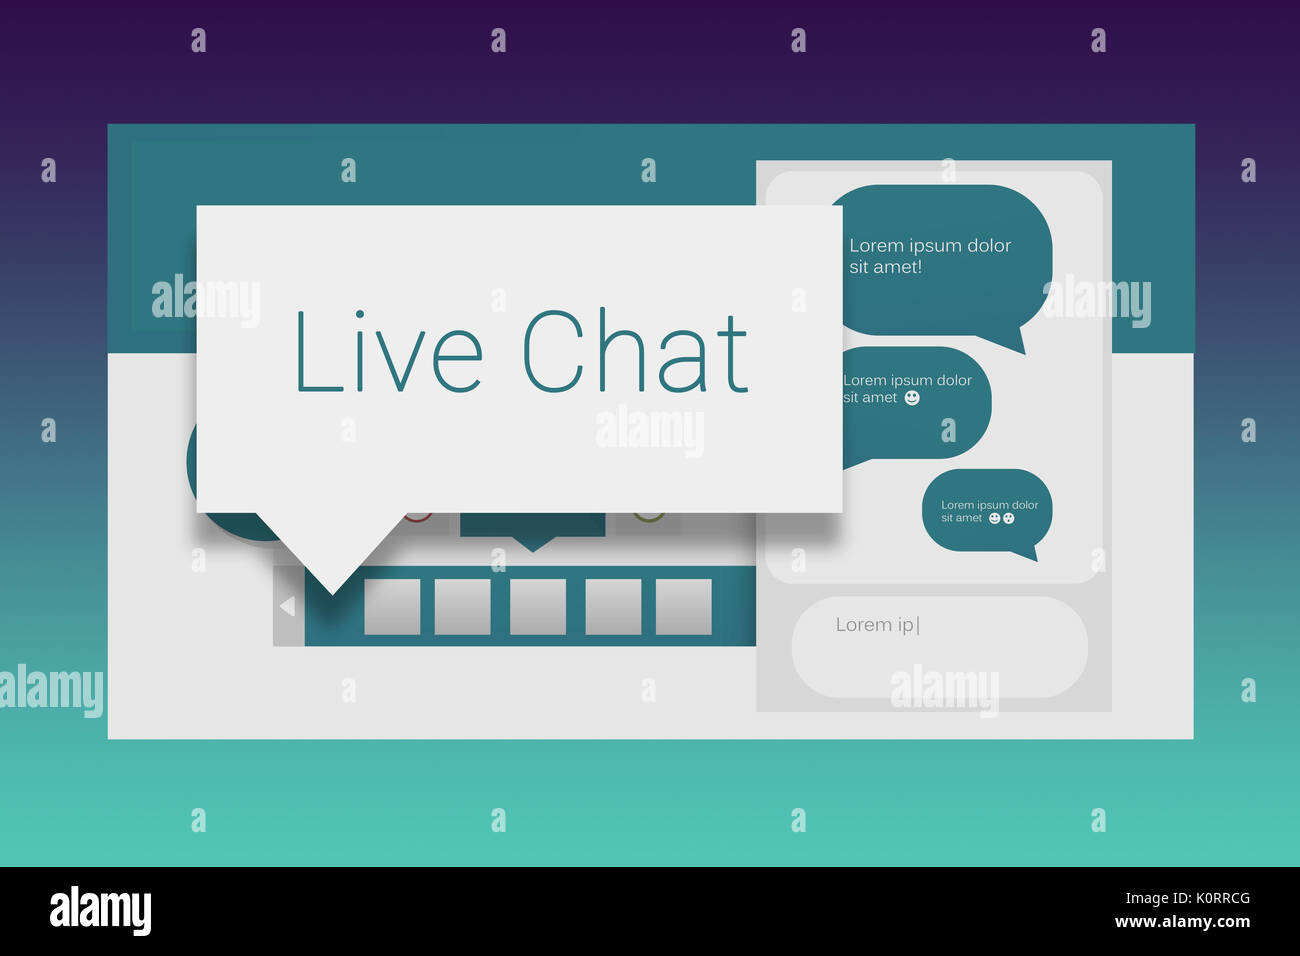 Speech bubbles with live chat text against turquoise and purple background Stock Photo